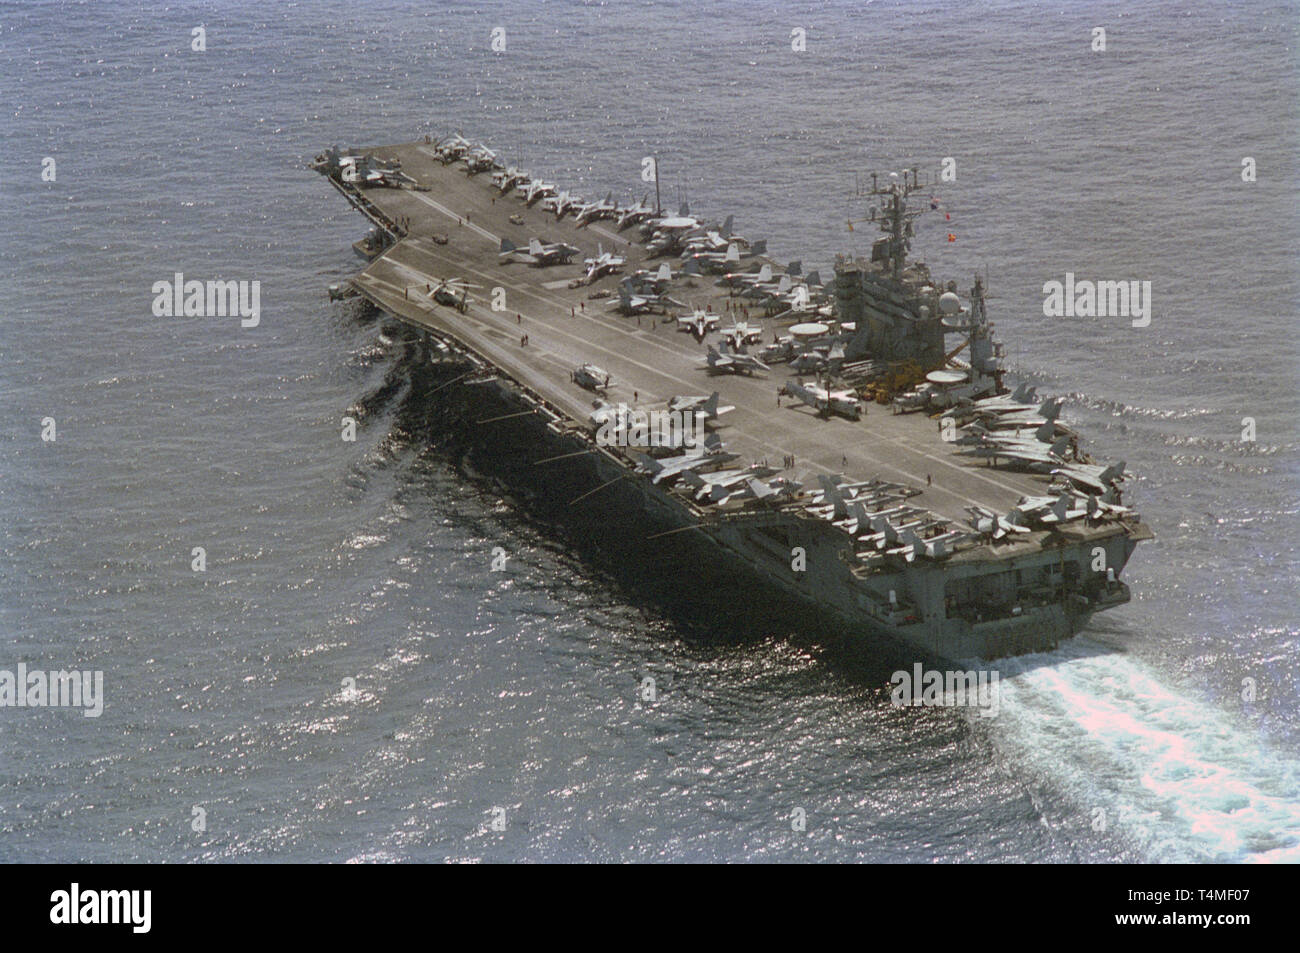 1st November 1993 The U.S. Navy aircraft carrier USS Abraham Lincoln (CVN72) in the Indian Ocean, 50 miles off Mogadishu, Somalia during Operation Continue Hope. Stock Photo